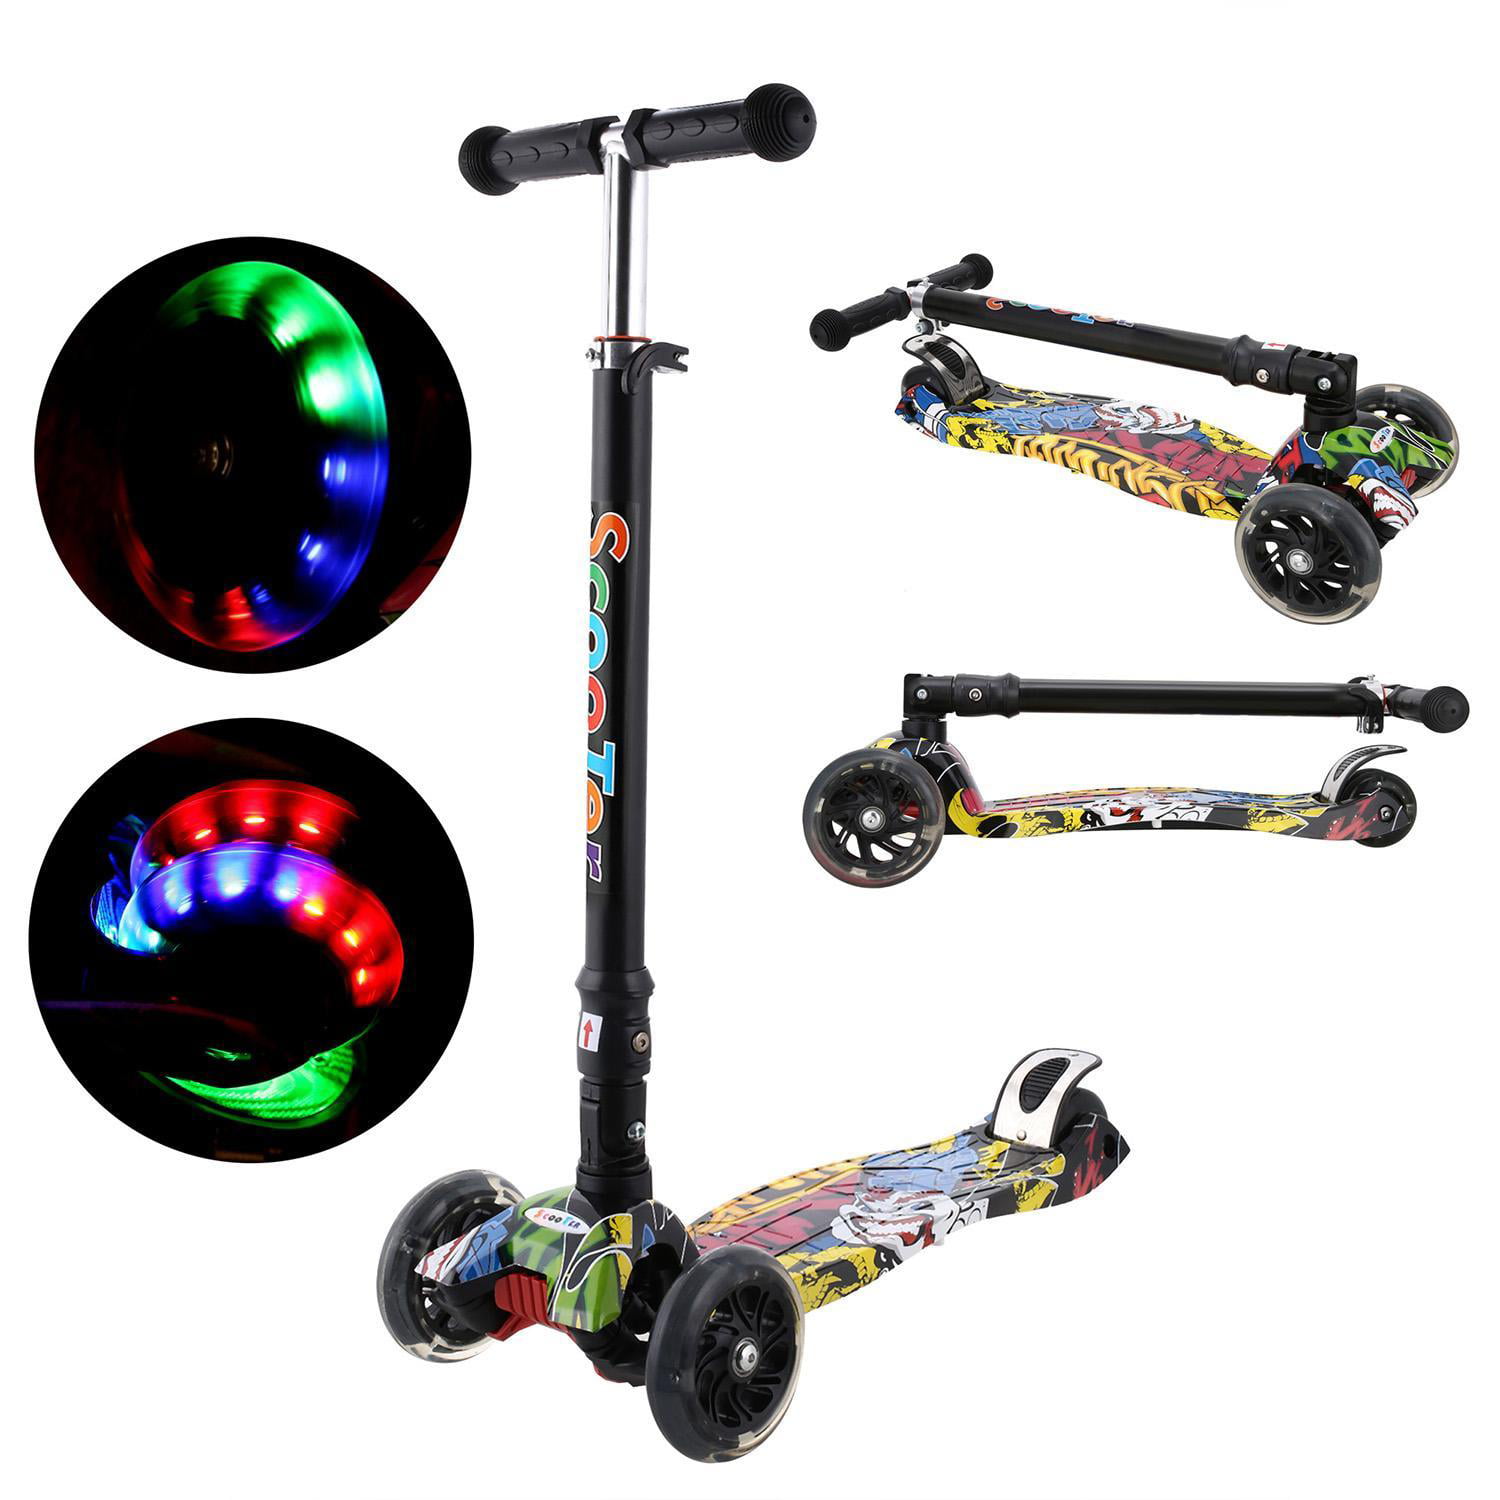 Lean to Steer with LED Girls & Boys FREDDO Toys 3 Wheel Kick Scooter for Kids